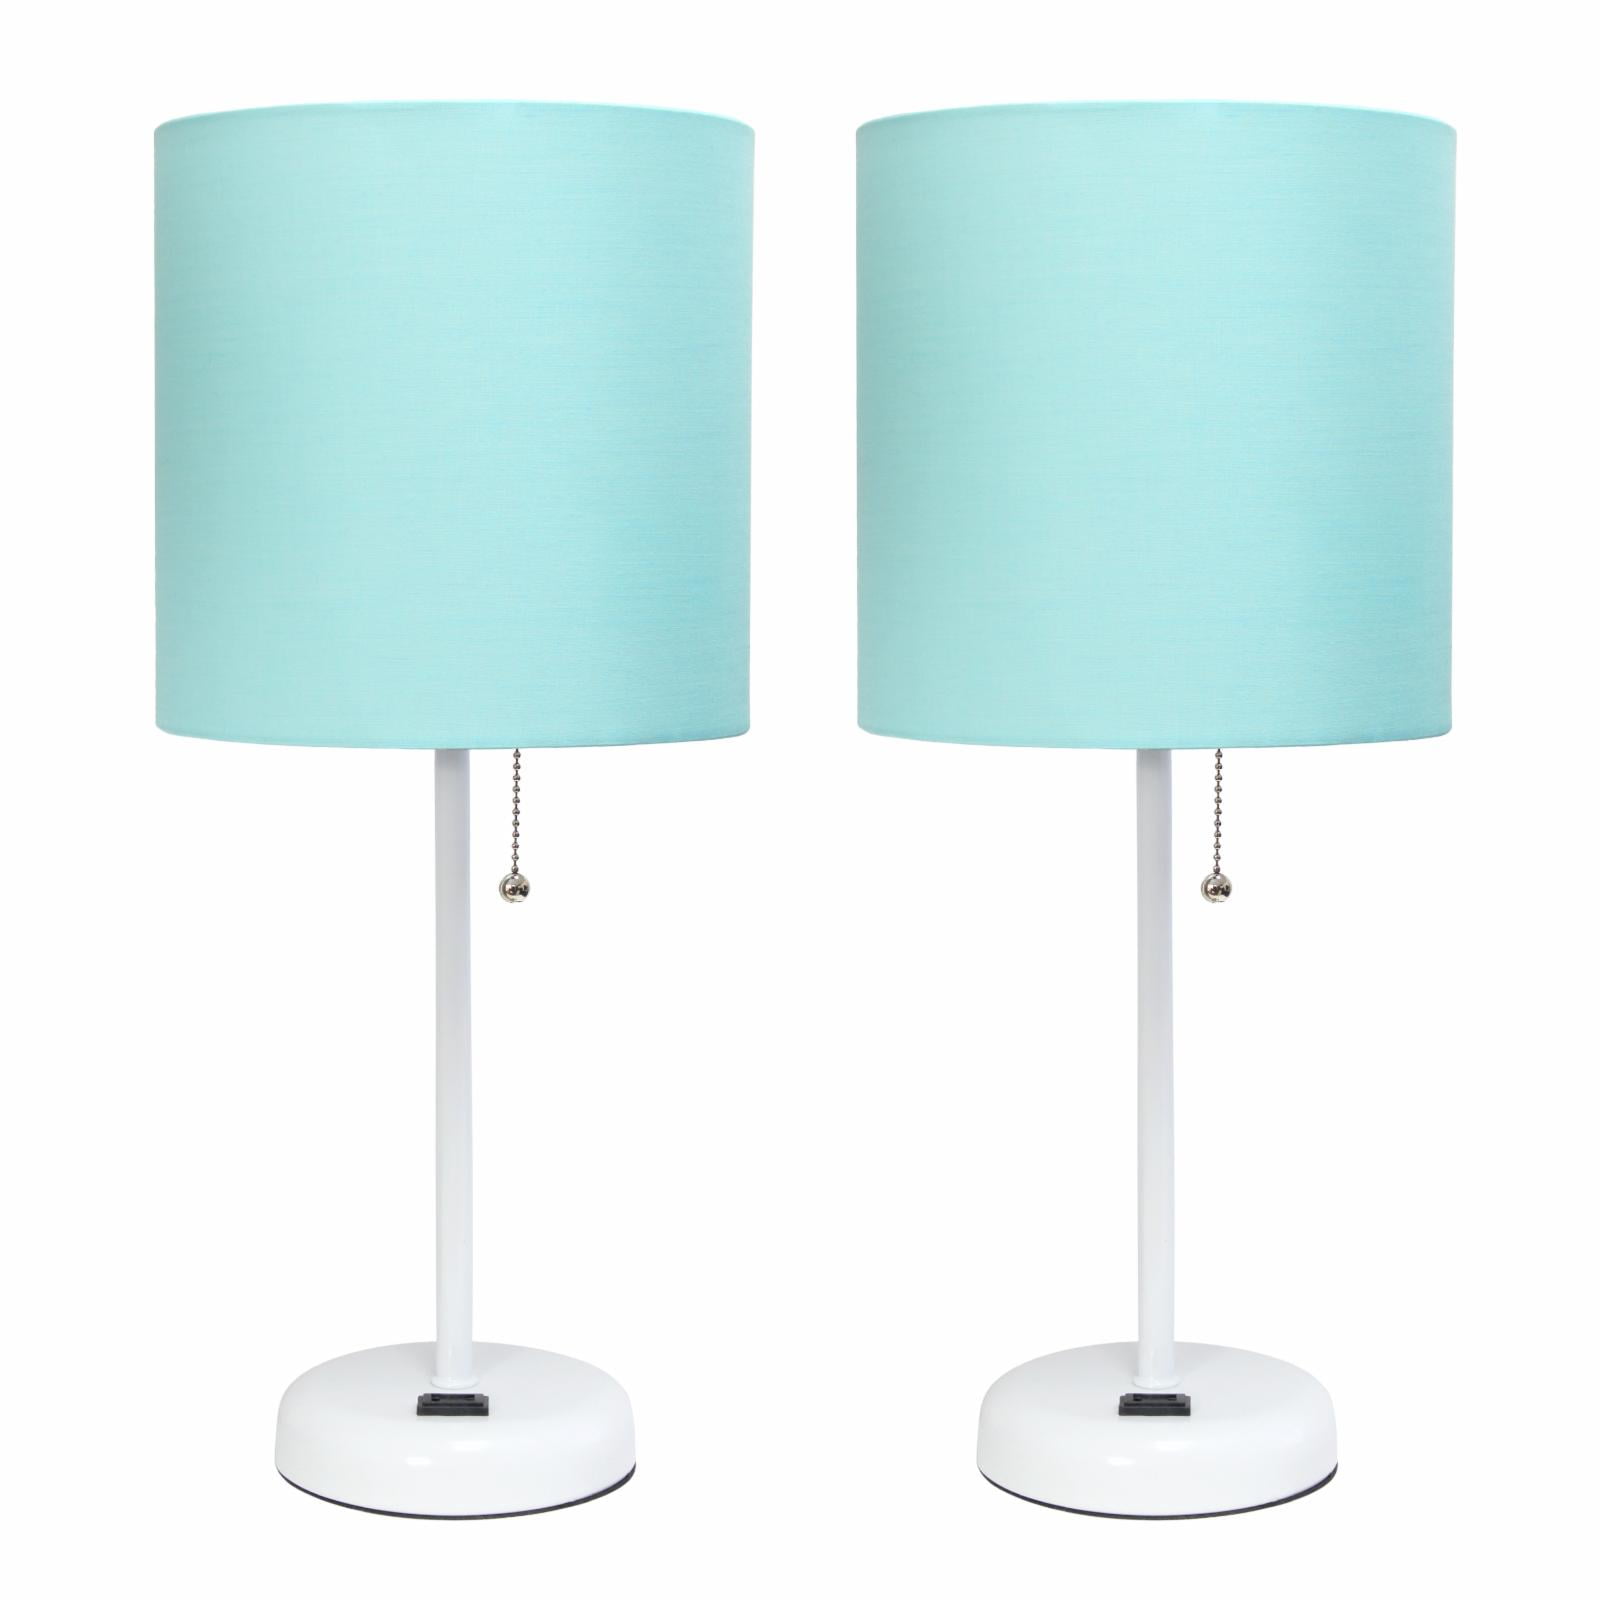 Lc2001-wht-2pk Brushed Steel Stick Table Lamp With Charging Outlet & Fabric Shade, White - Set Of 2